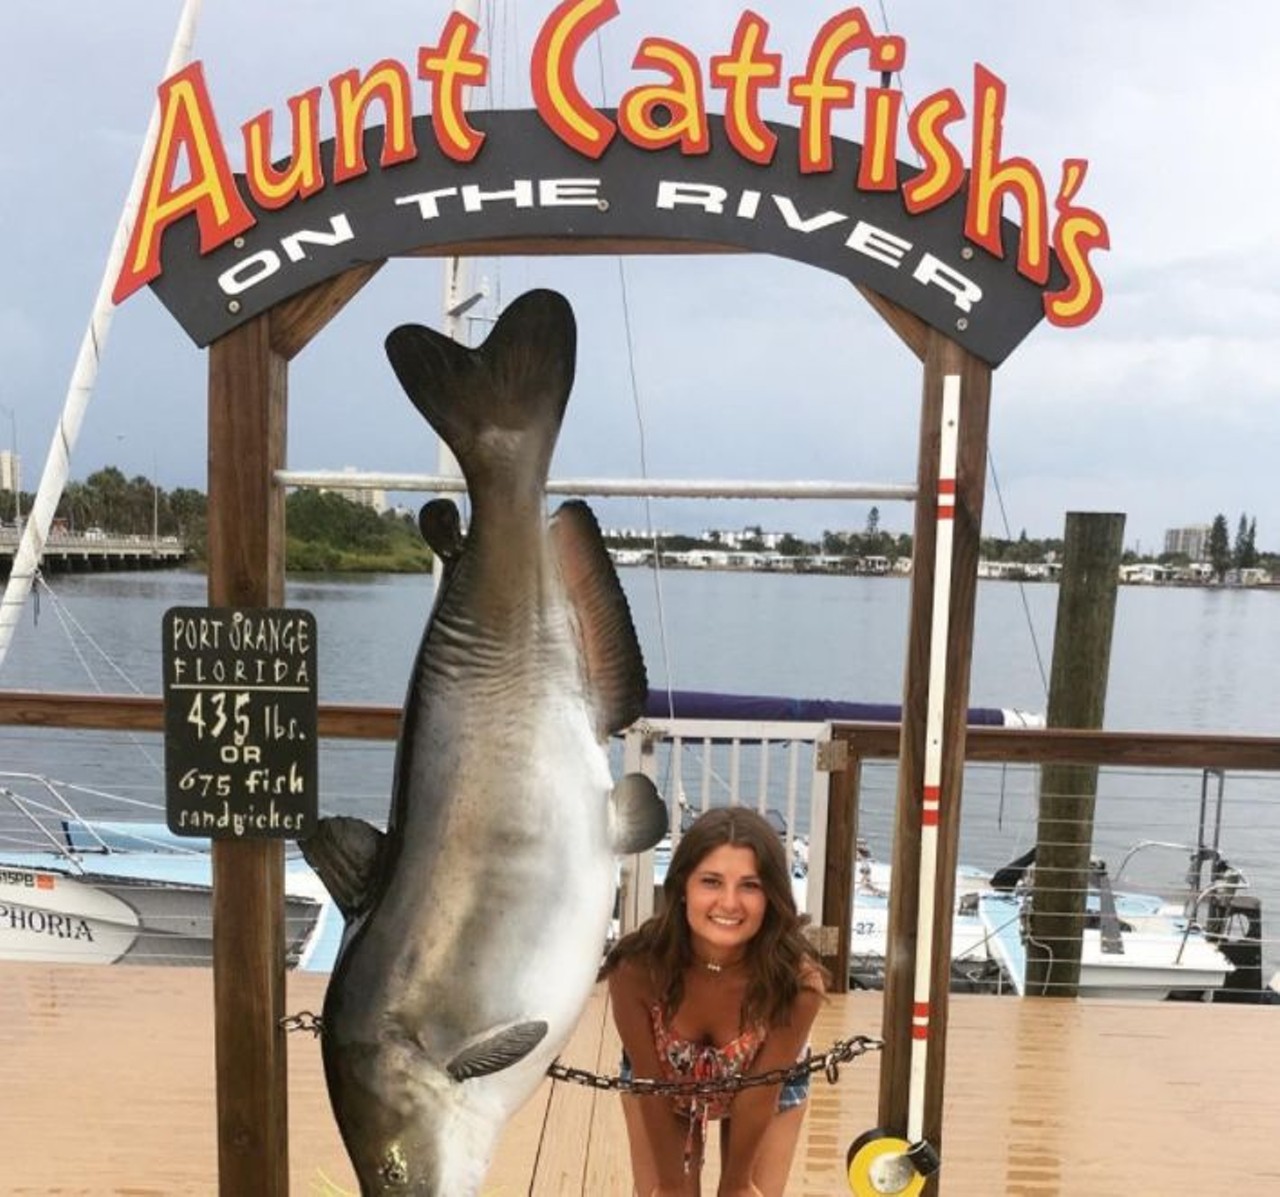 Aunt Catfish's
4009 Halifax Dr, Port Orange, FL 32127
A family owned and operated southern seafood tradition, Aunt Catfish's offers no pretenses on the river - an inside and outside restaurant overlooking the bridge into Daytona Beach Shores.
Photo via paigeoglesby15/Insatgram